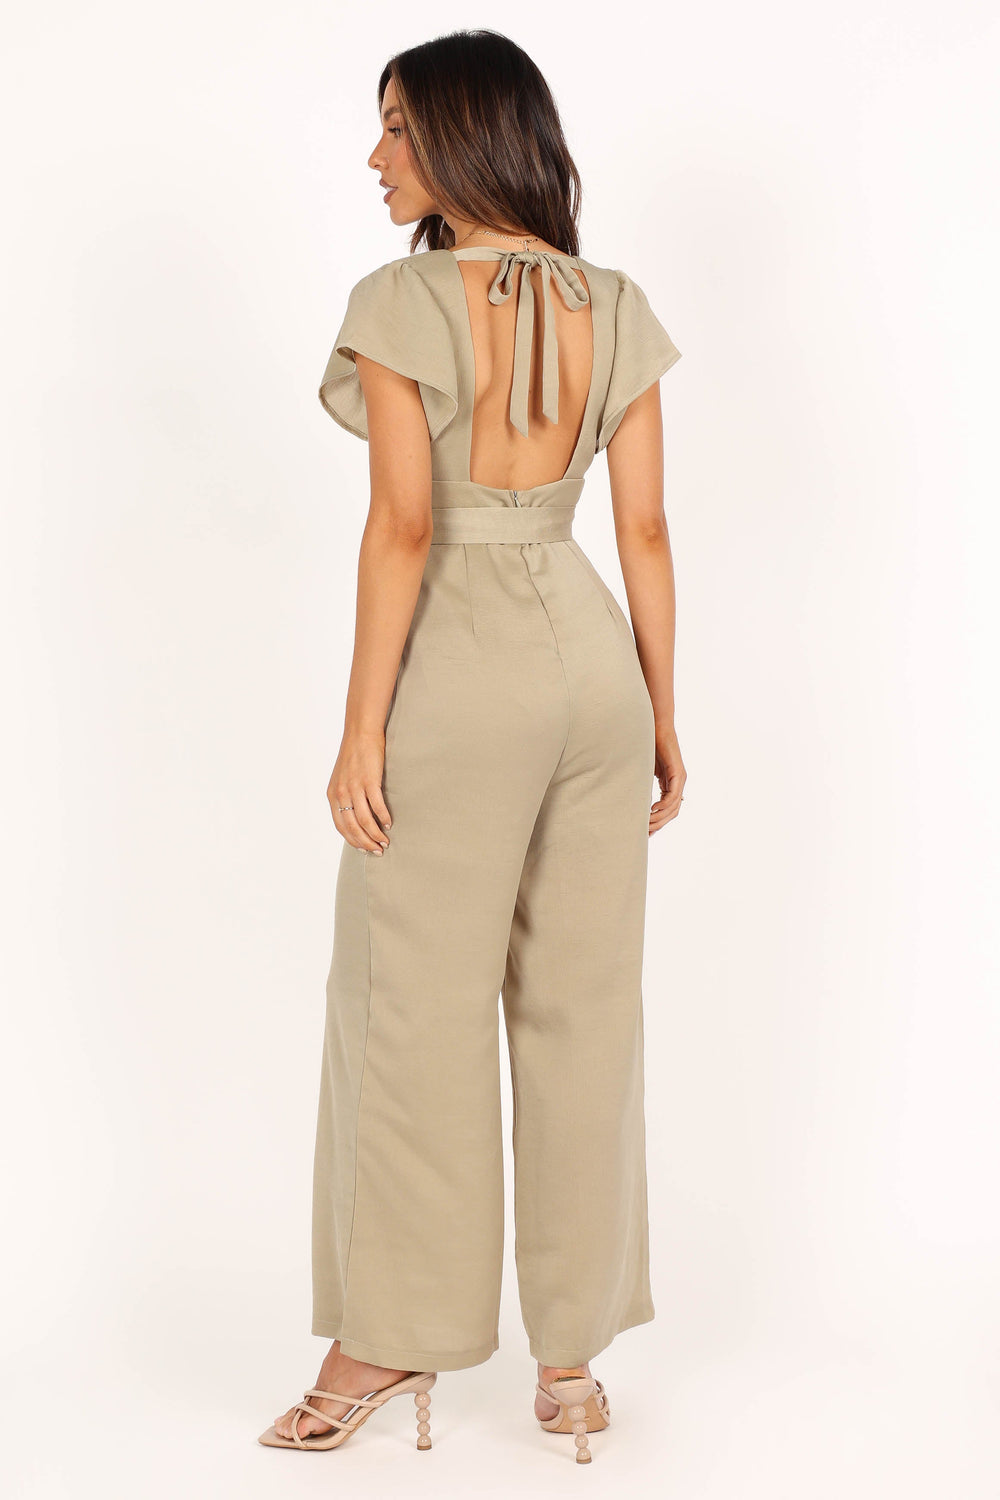 Petal and Pup USA Rompers Orin Jumpsuit - Olive